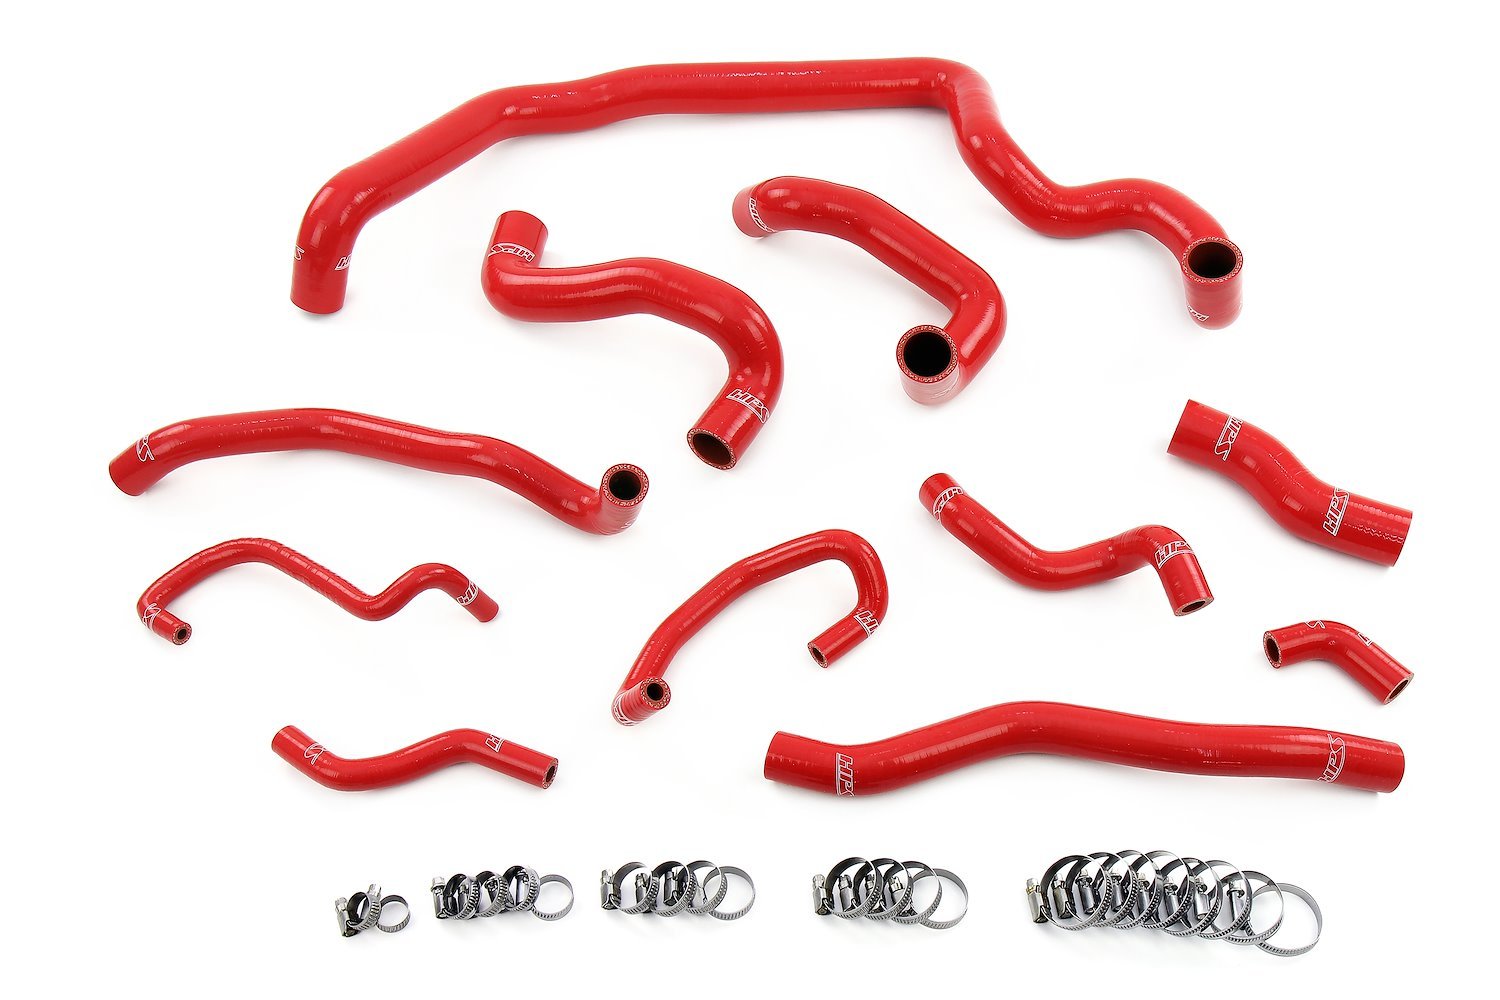 57-1995-RED Coolant Hose Kit, 3-Ply Reinforced Silicone Hoses, For Radiator, Heater, Water Pump, Expansion Tank